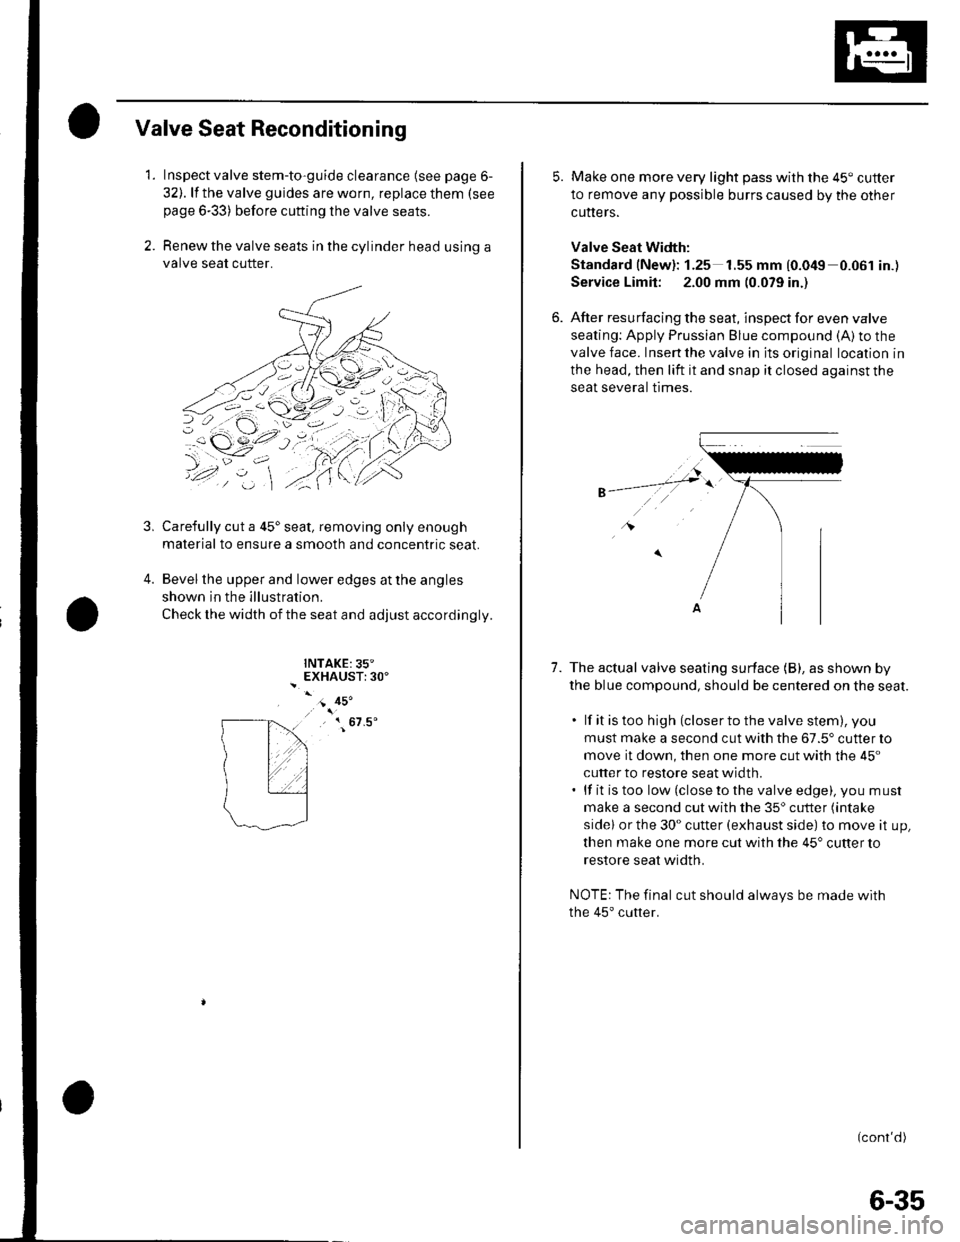 HONDA CIVIC 2002 7.G Workshop Manual Valve Seat Reconditioning
1. Inspect valve stem-to-guide clearance (see page 6-
32). lf the valve guides are worn, replace them (see
page 6-33) before cutting the valve seats.
2. Renew the valve seats